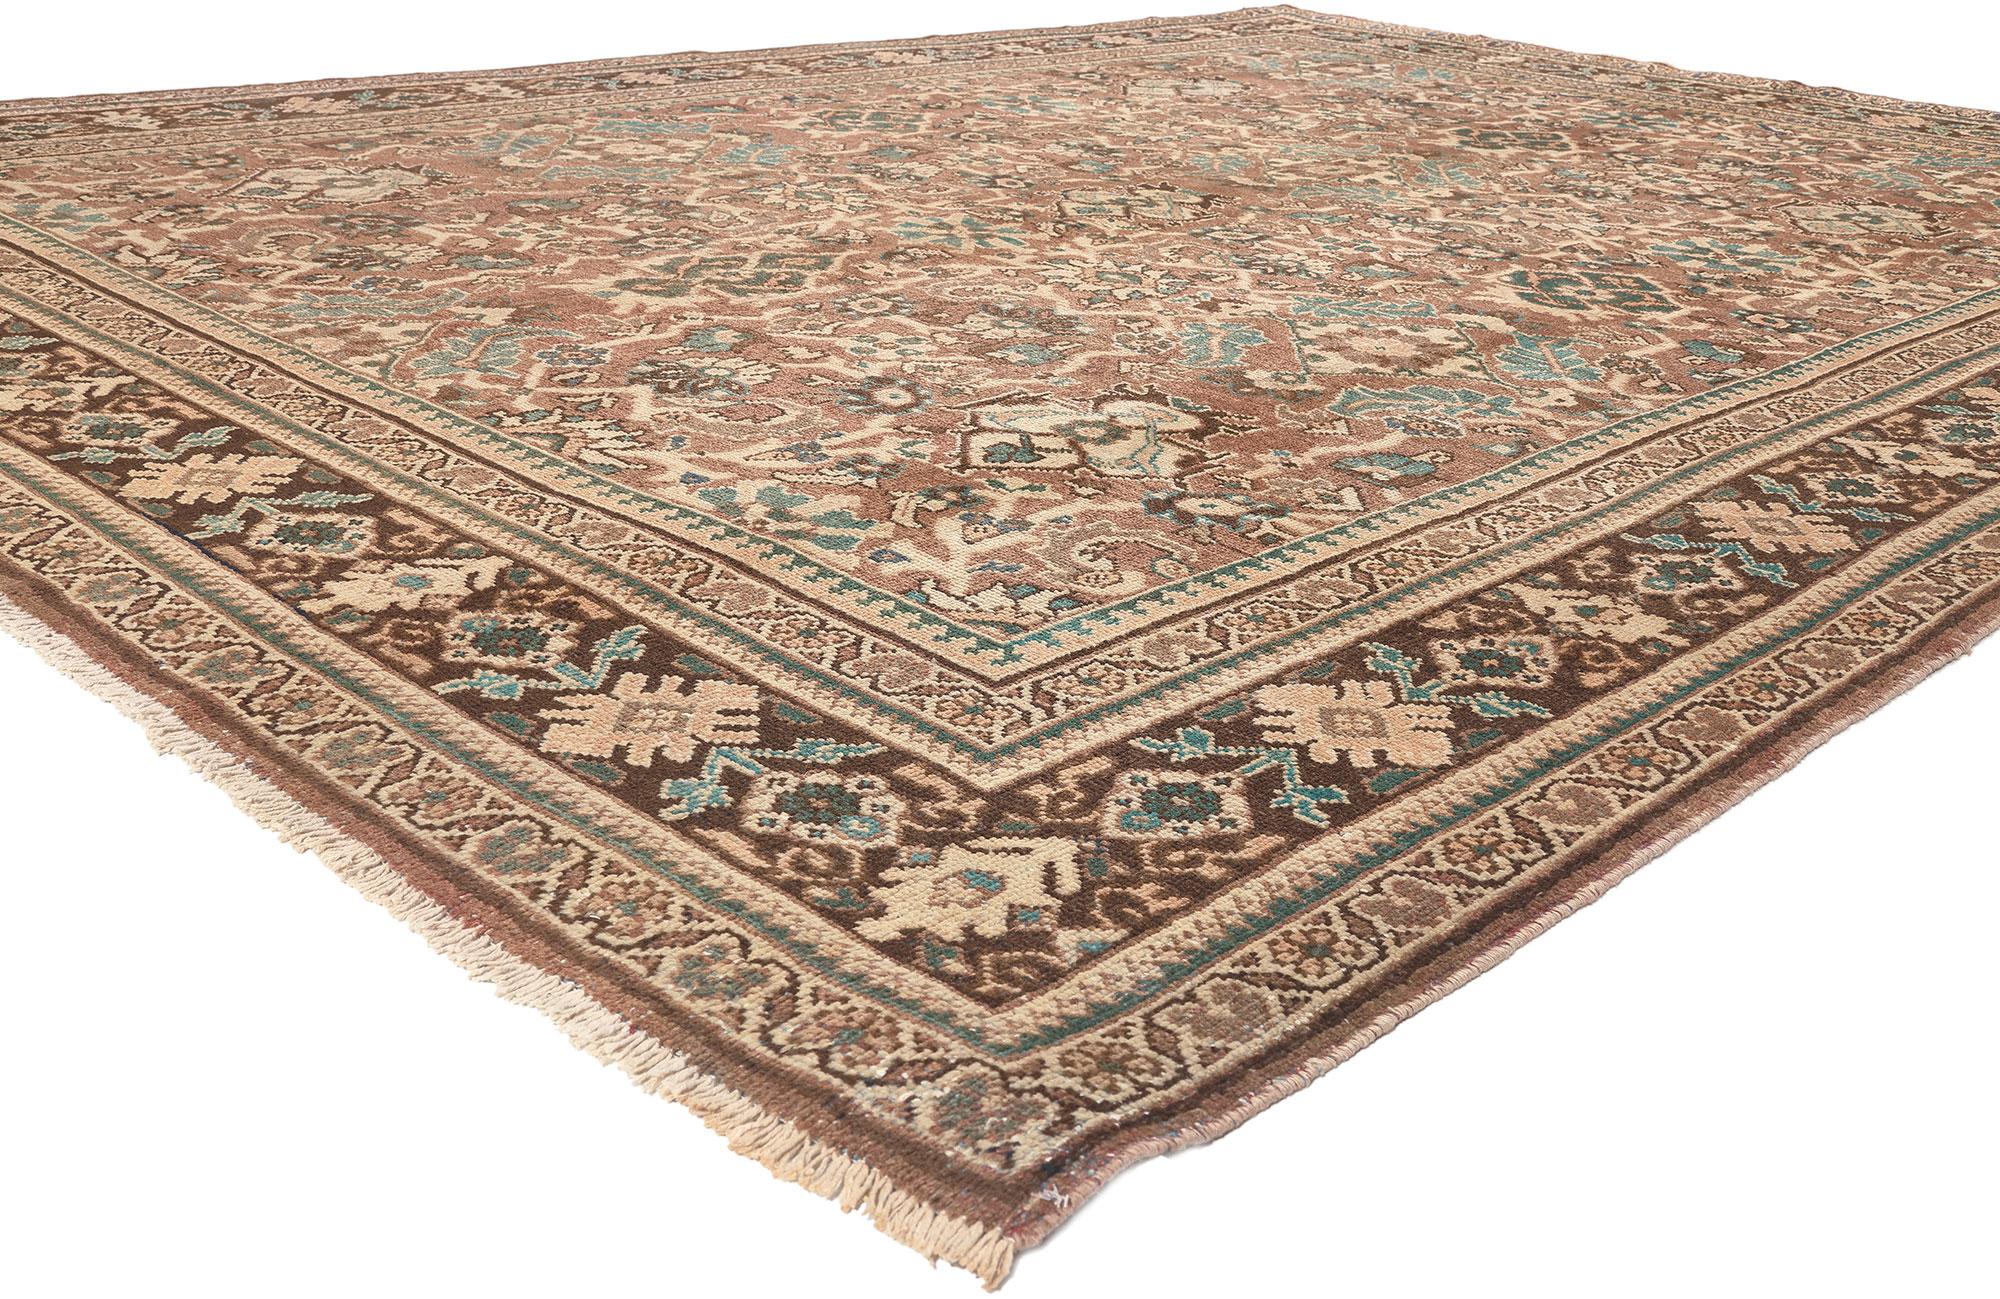 76313 Vintage Persian Mahal Rug, 09'01 x 12'07. With its timeless design and warm earth-tone colors, this hand knotted wool vintage Persian Mahal rug astounds with its beauty. It features an all-over Herati pattern with a botanical lattice composed